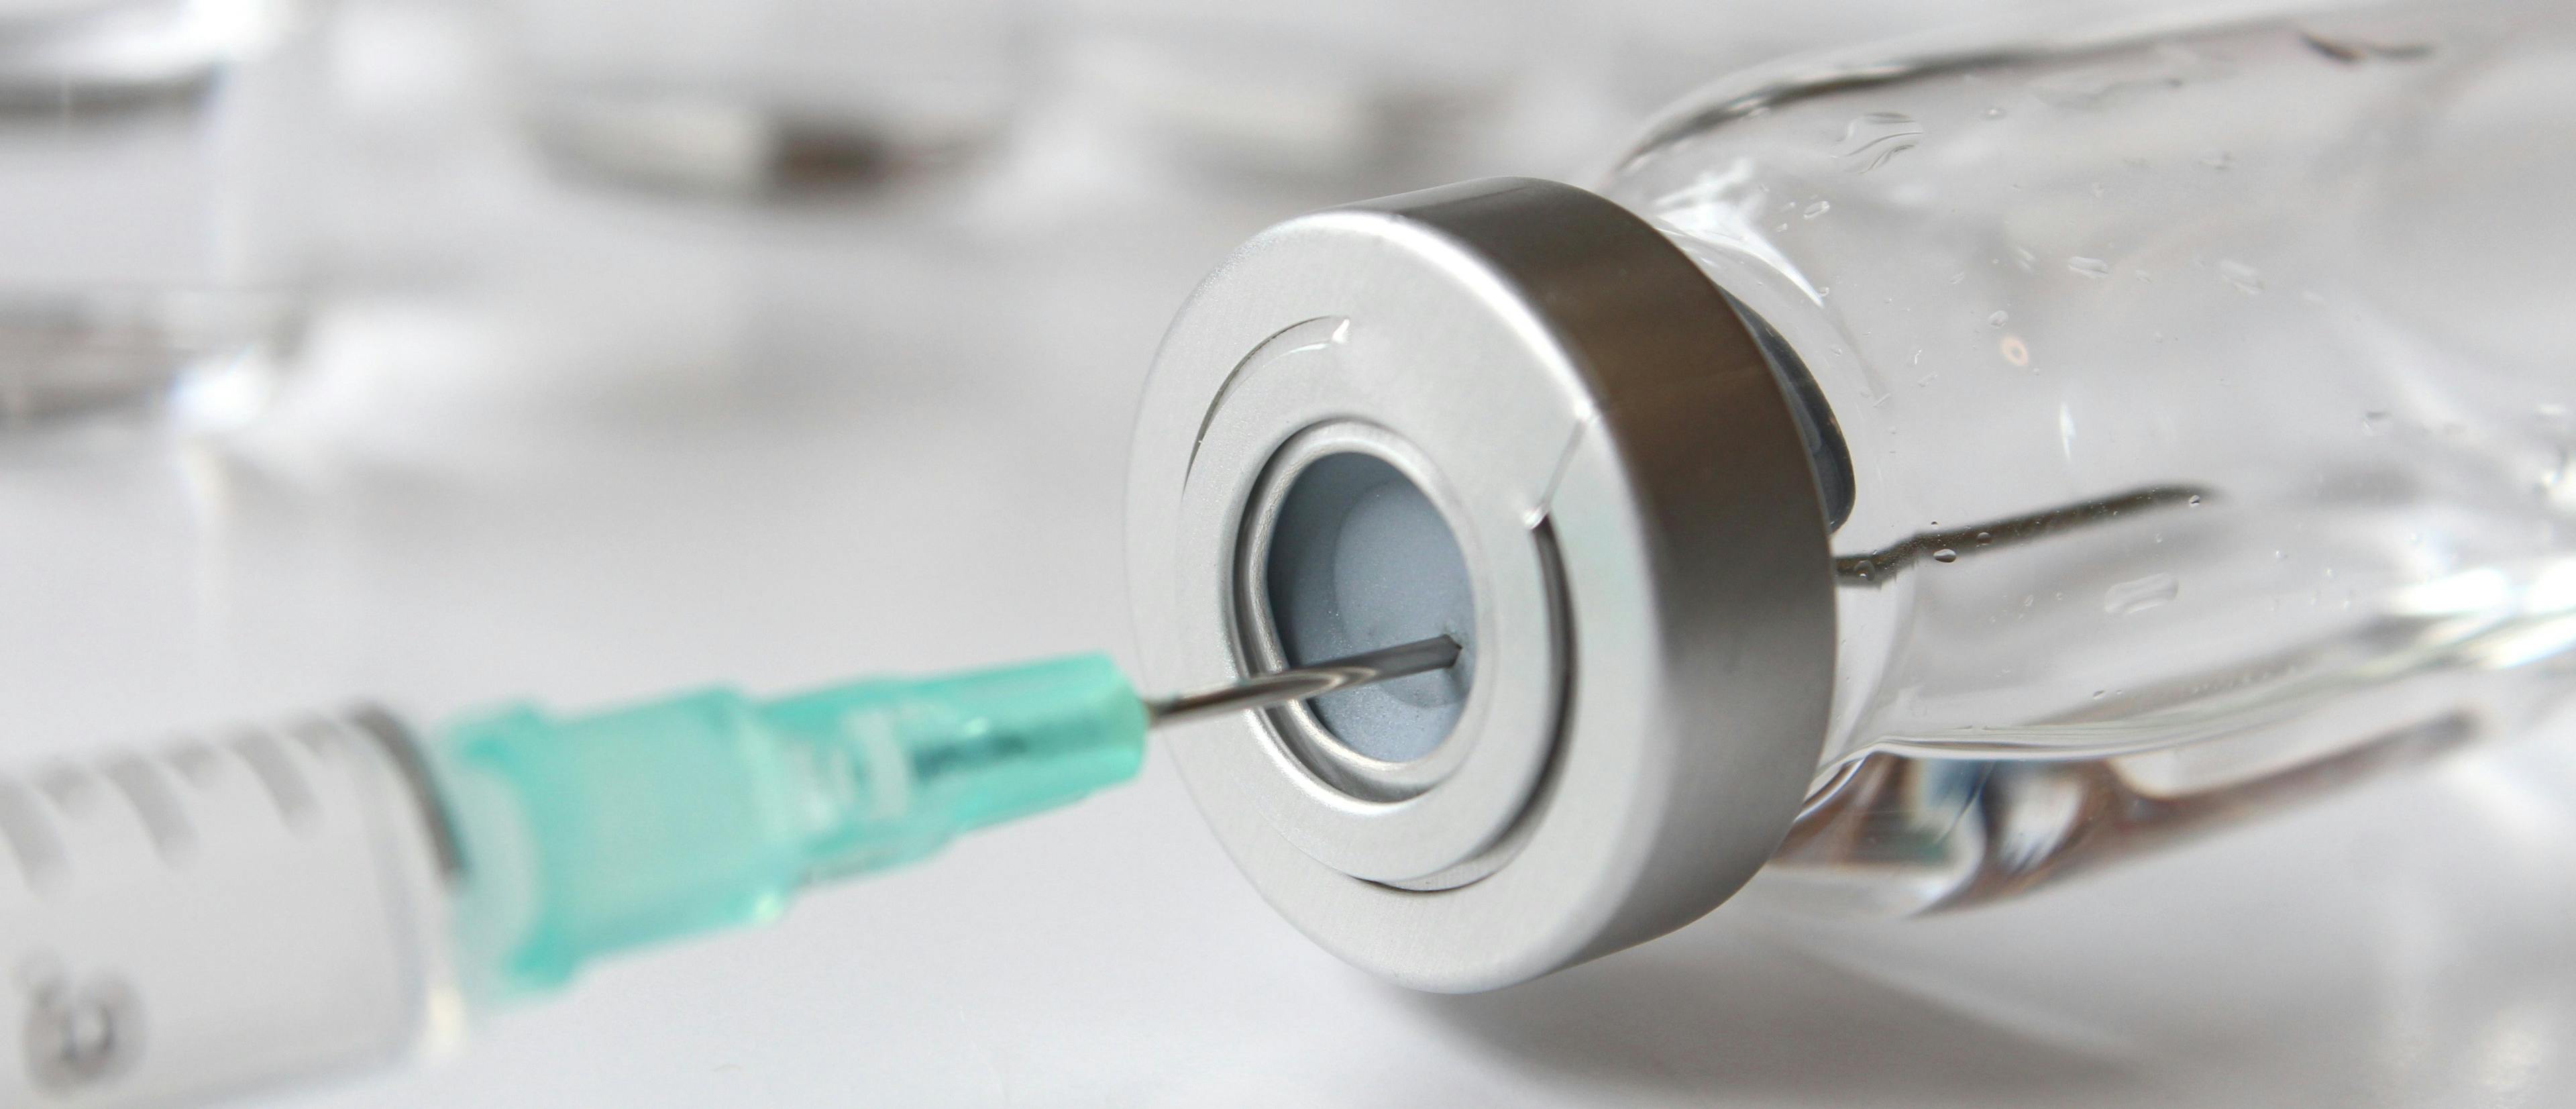 Flu Vaccine Supply Chain Changes Needed to Stop Shortages